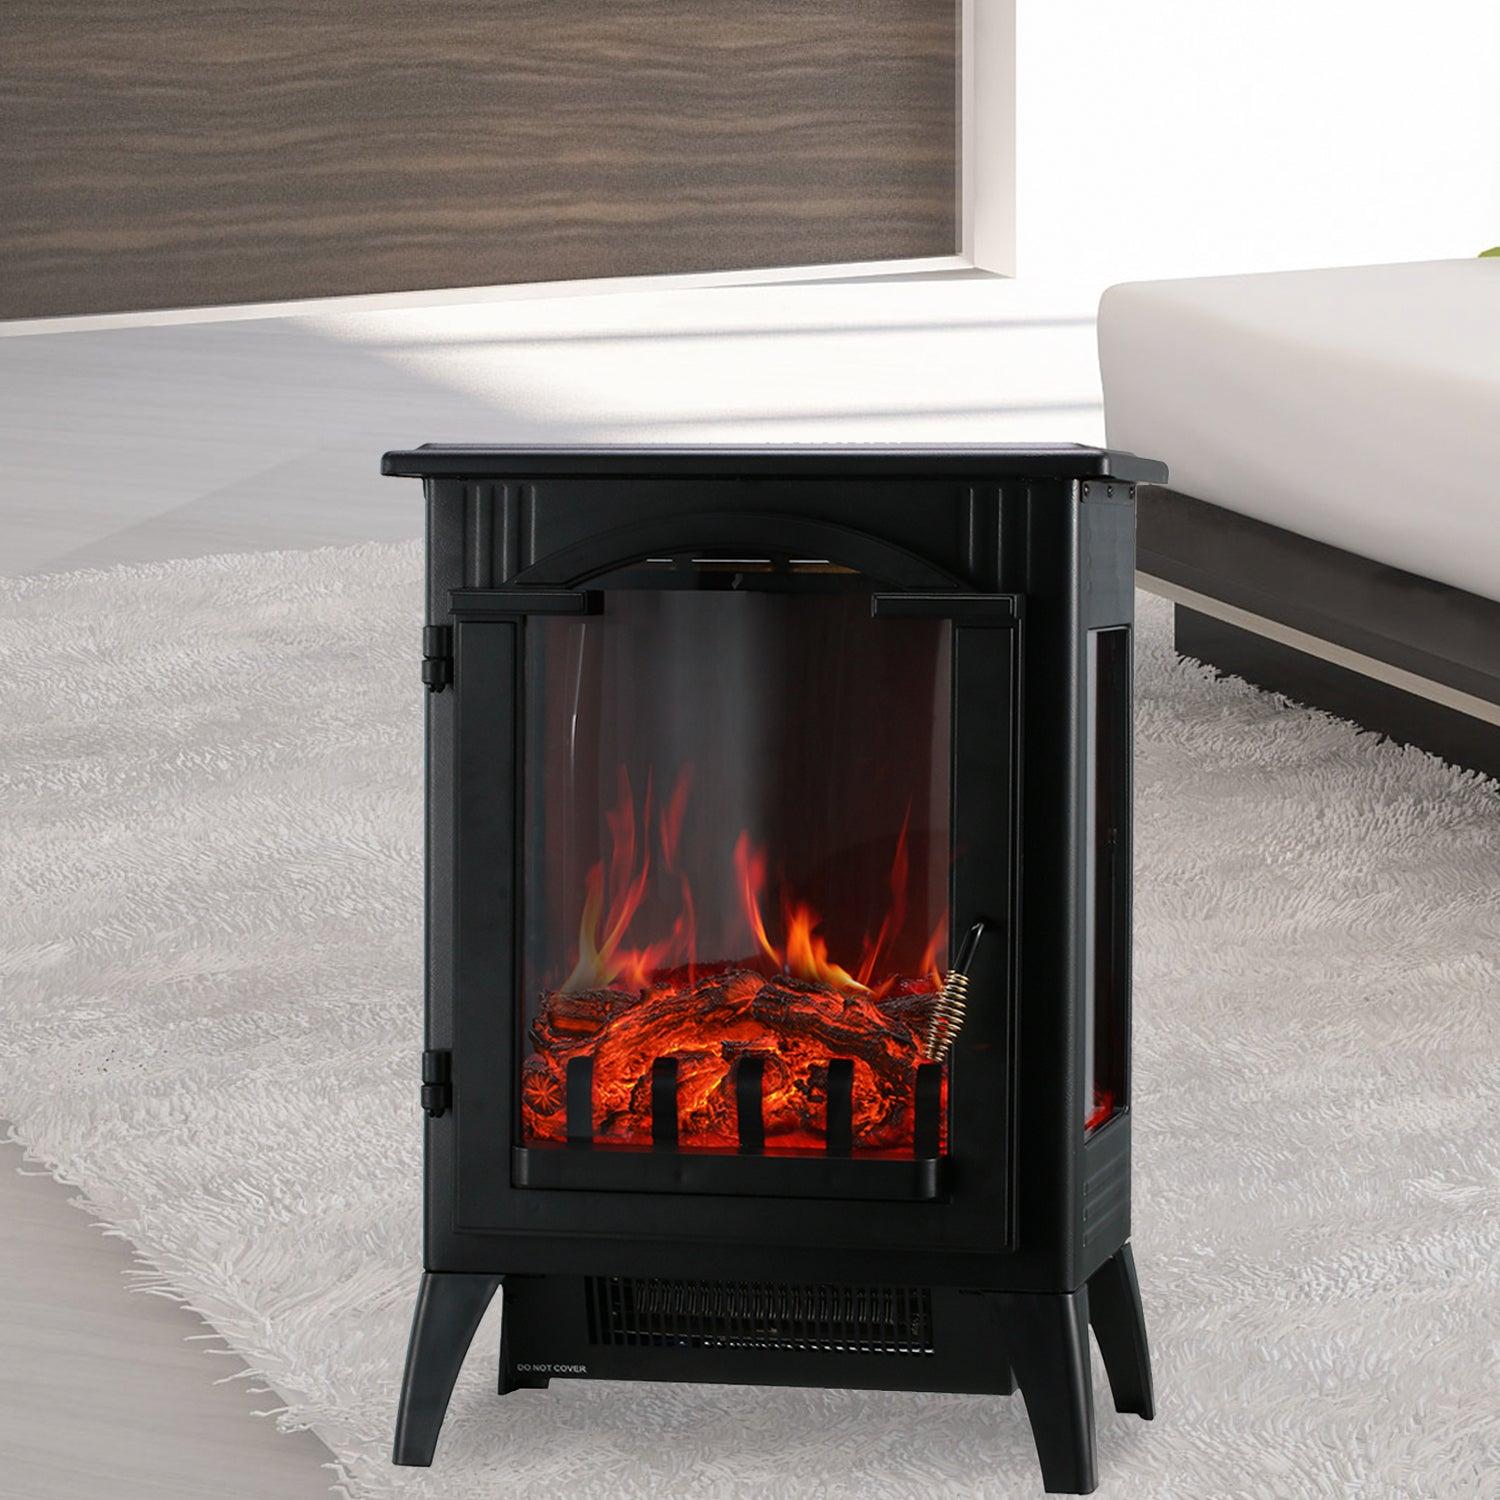 Ainfox 750W/1500W Standing Electric Fireplace for $40.60 Shipped